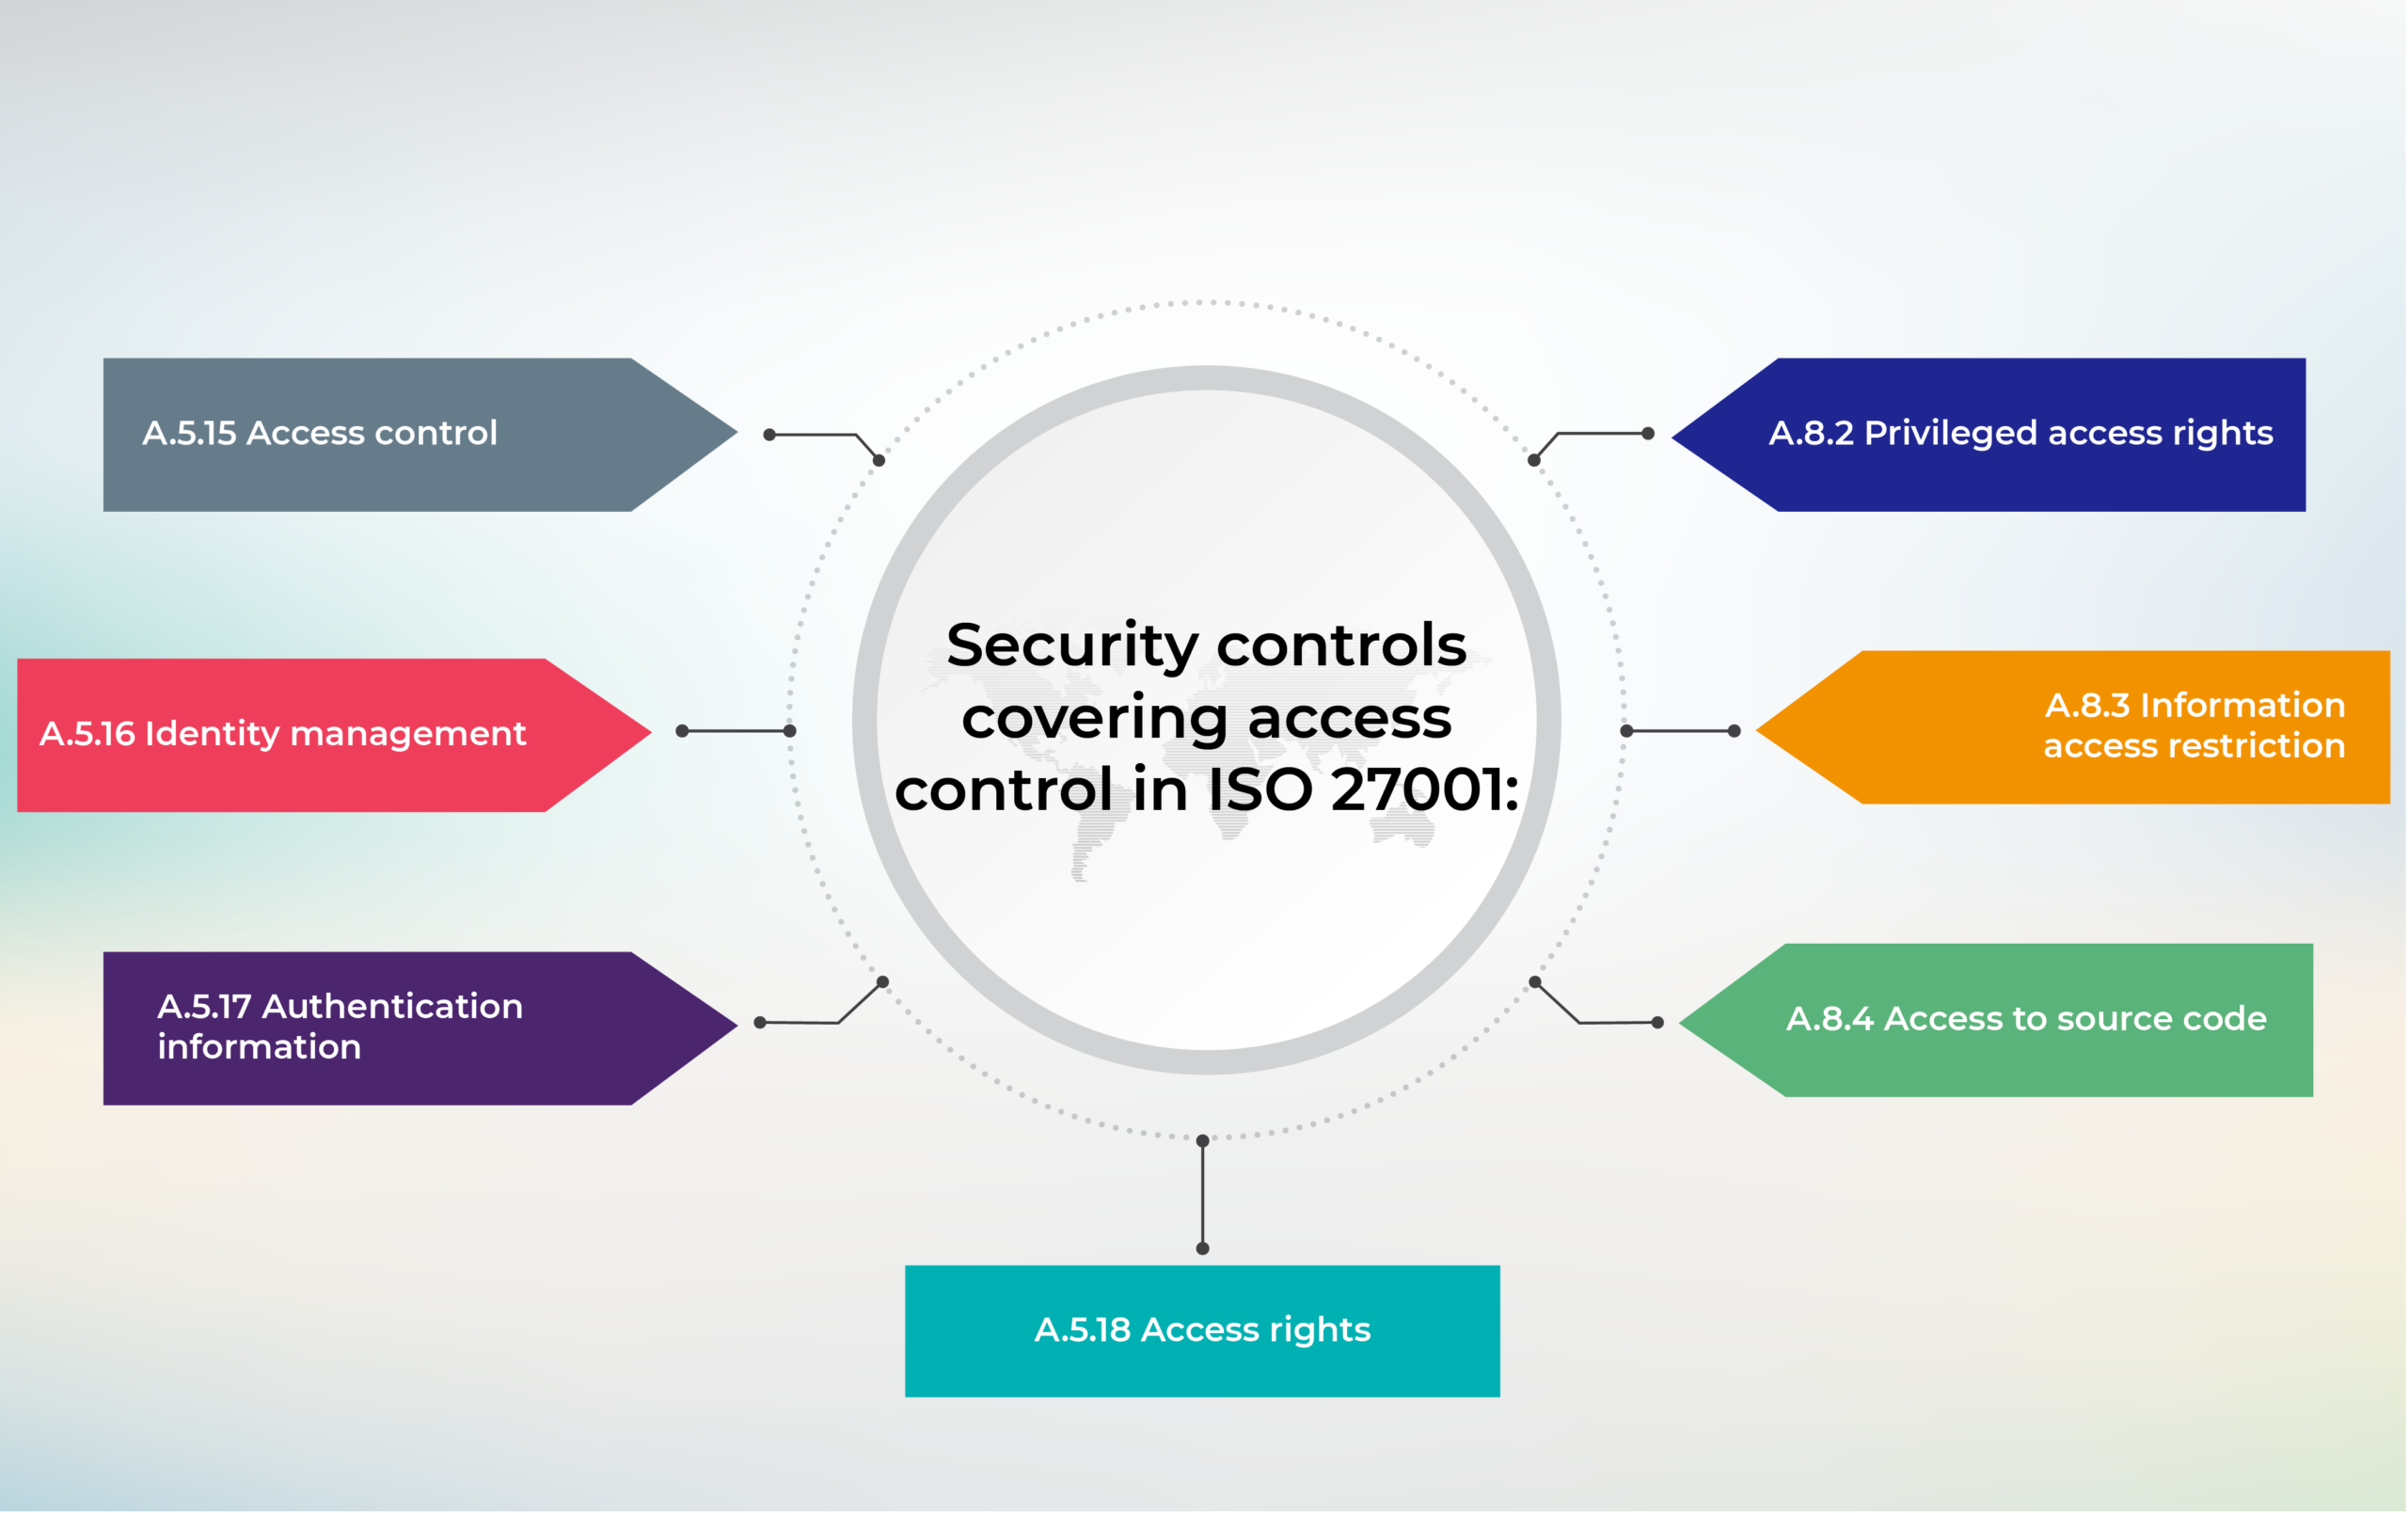 Access control in ISO 27001